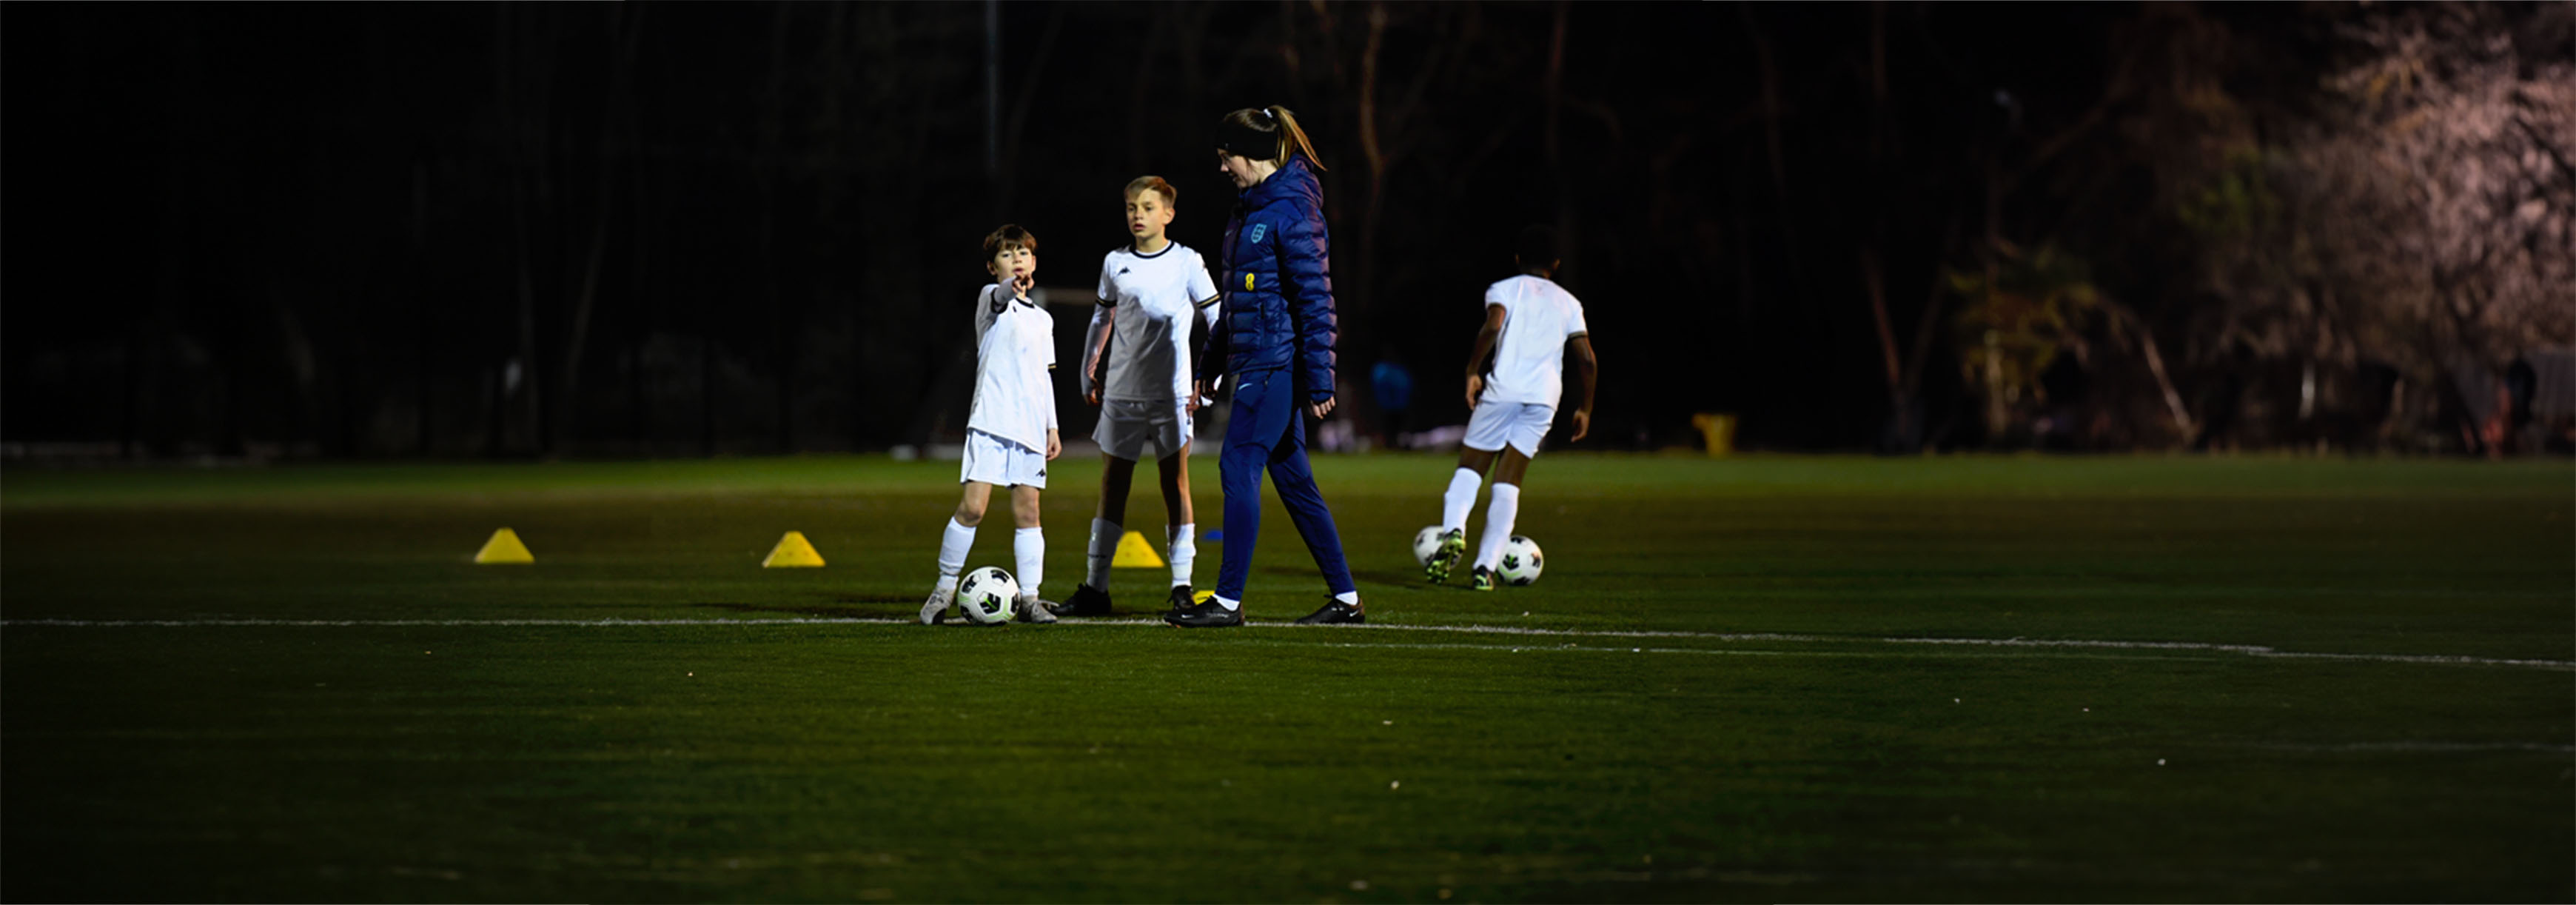 A coach talks to two players during training.